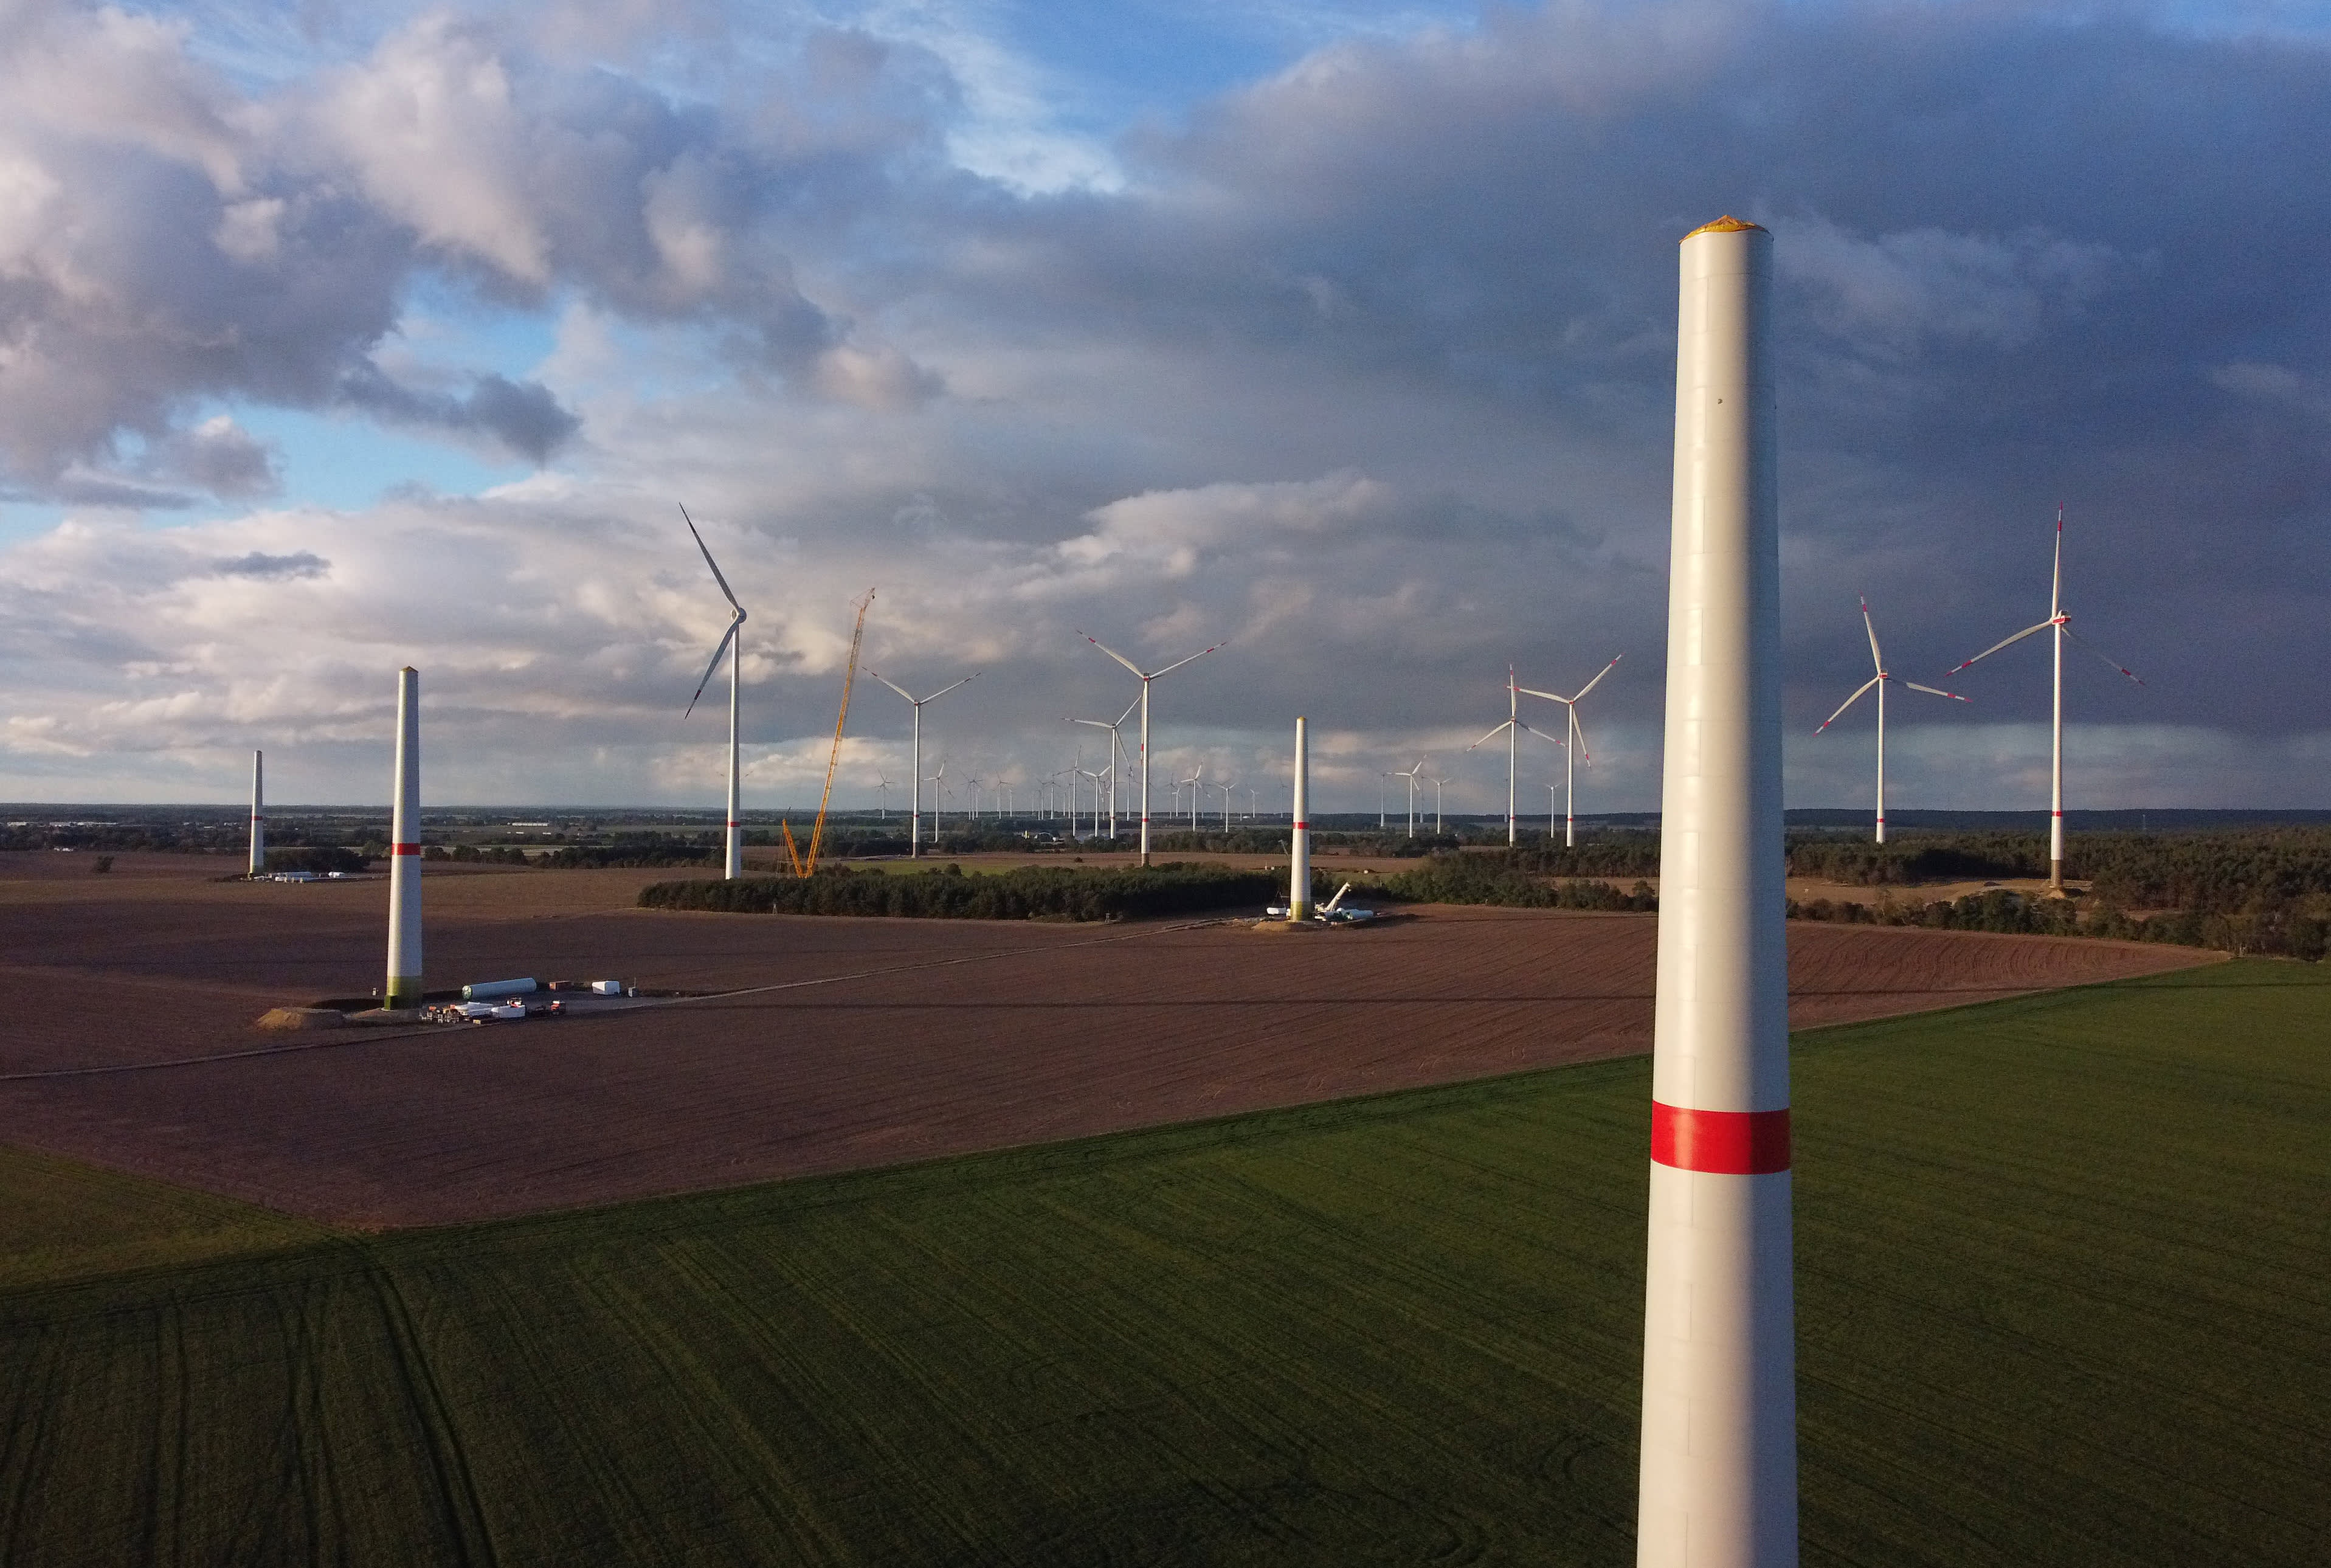 Europe installed a record amount of wind power last year. But industry says it’s not enough